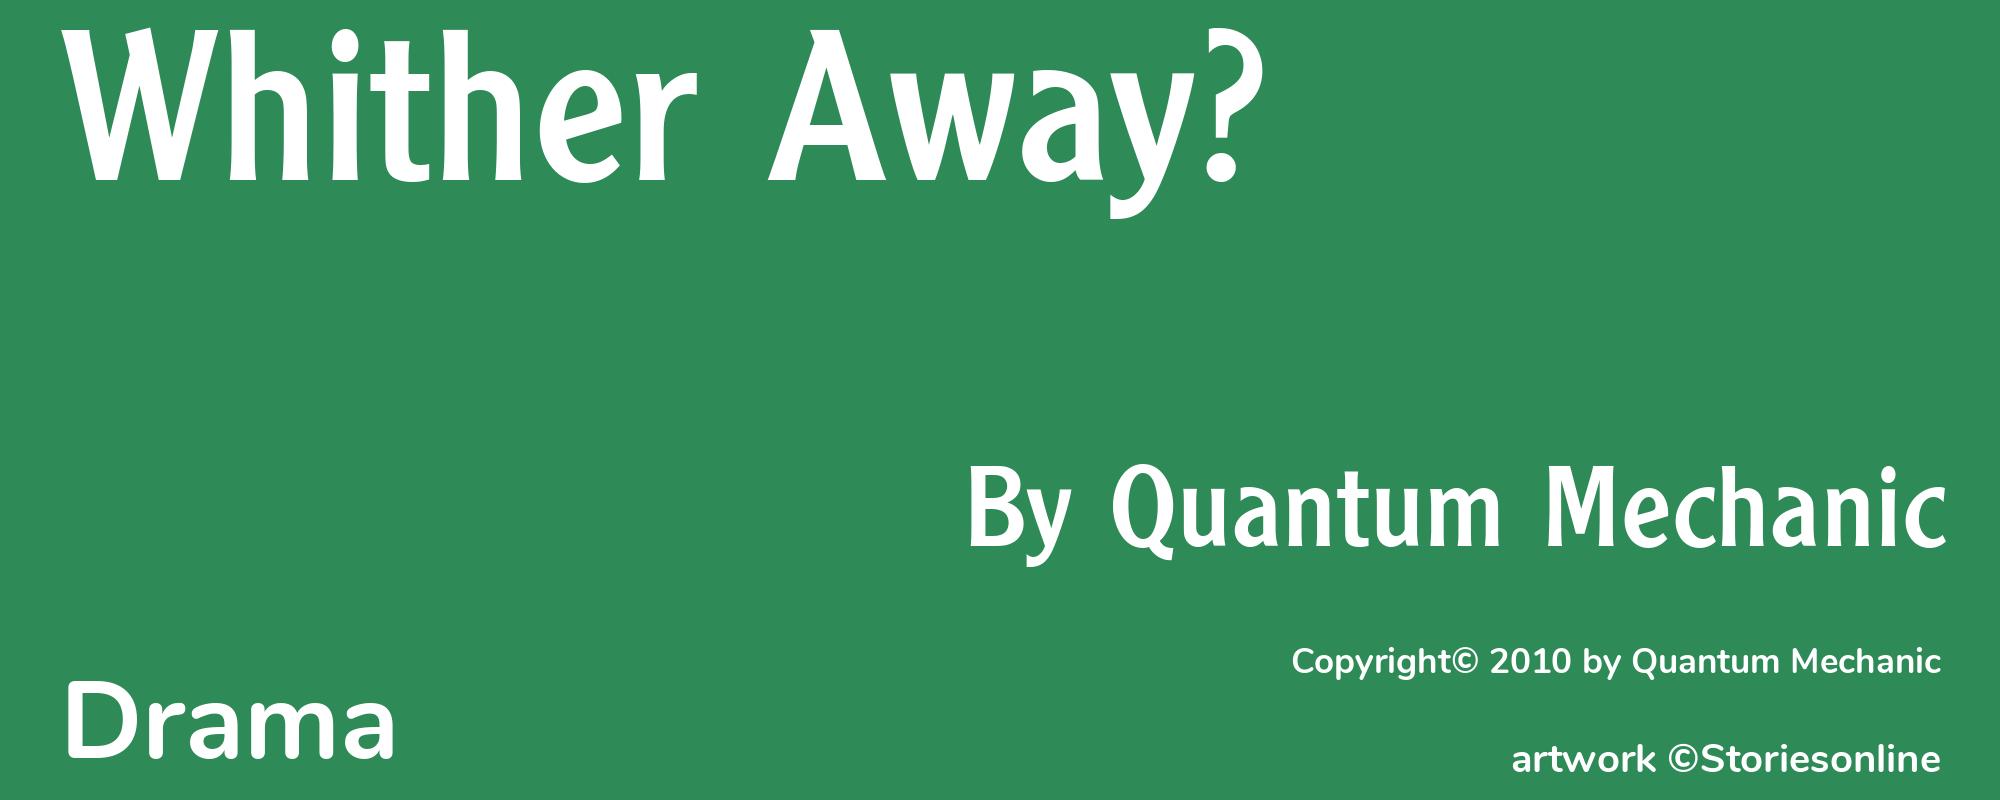 Whither Away? - Cover